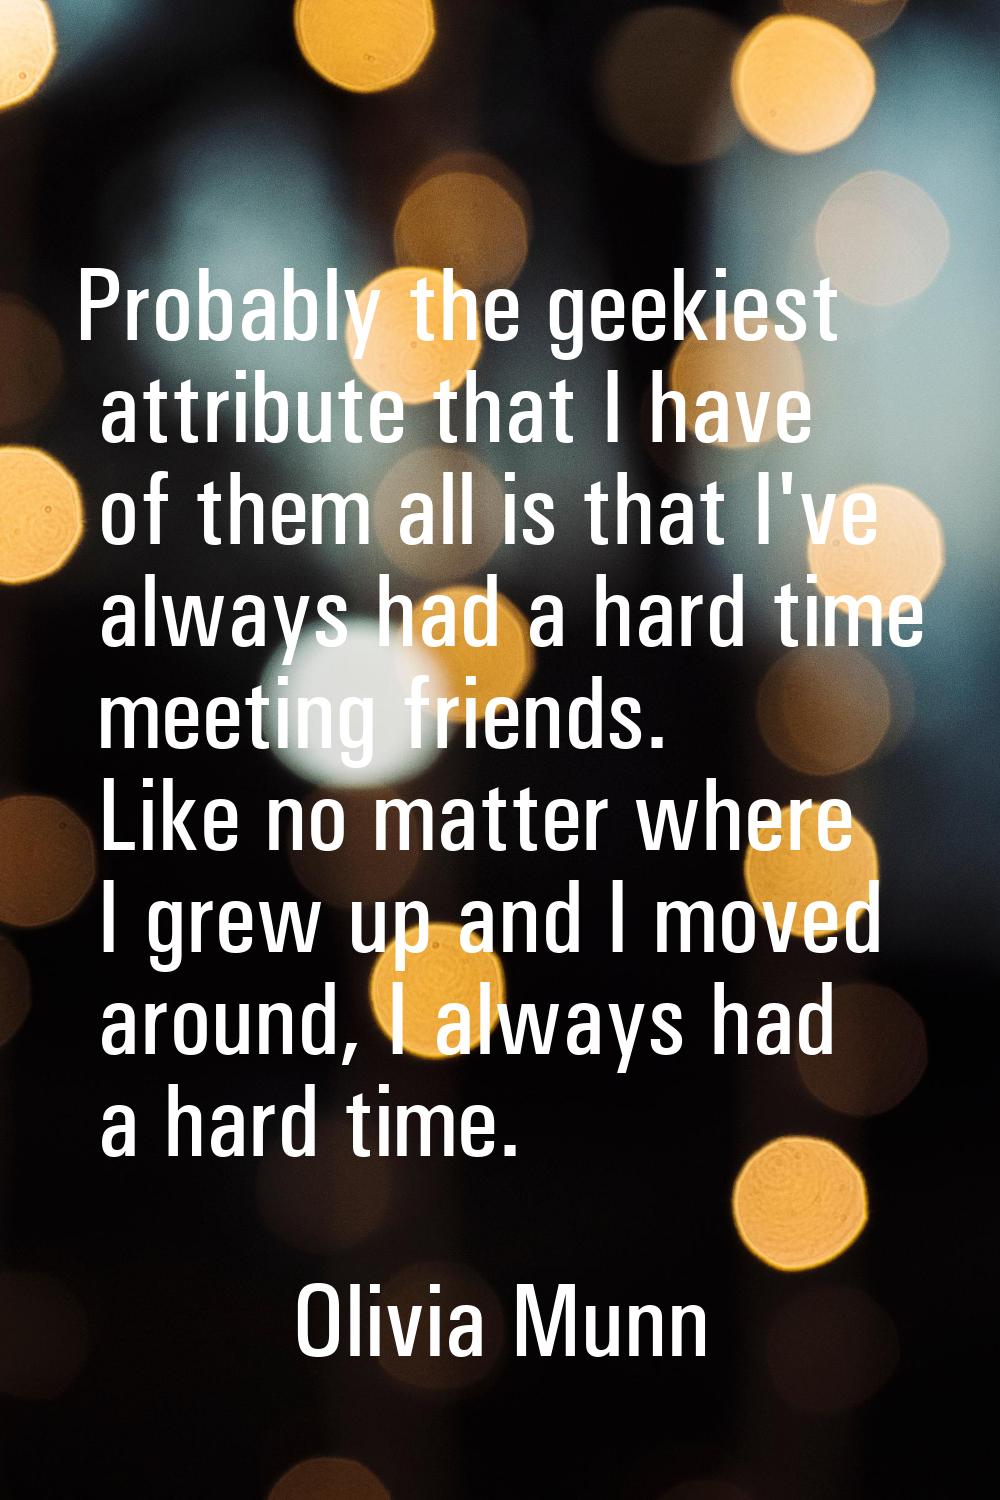 Probably the geekiest attribute that I have of them all is that I've always had a hard time meeting